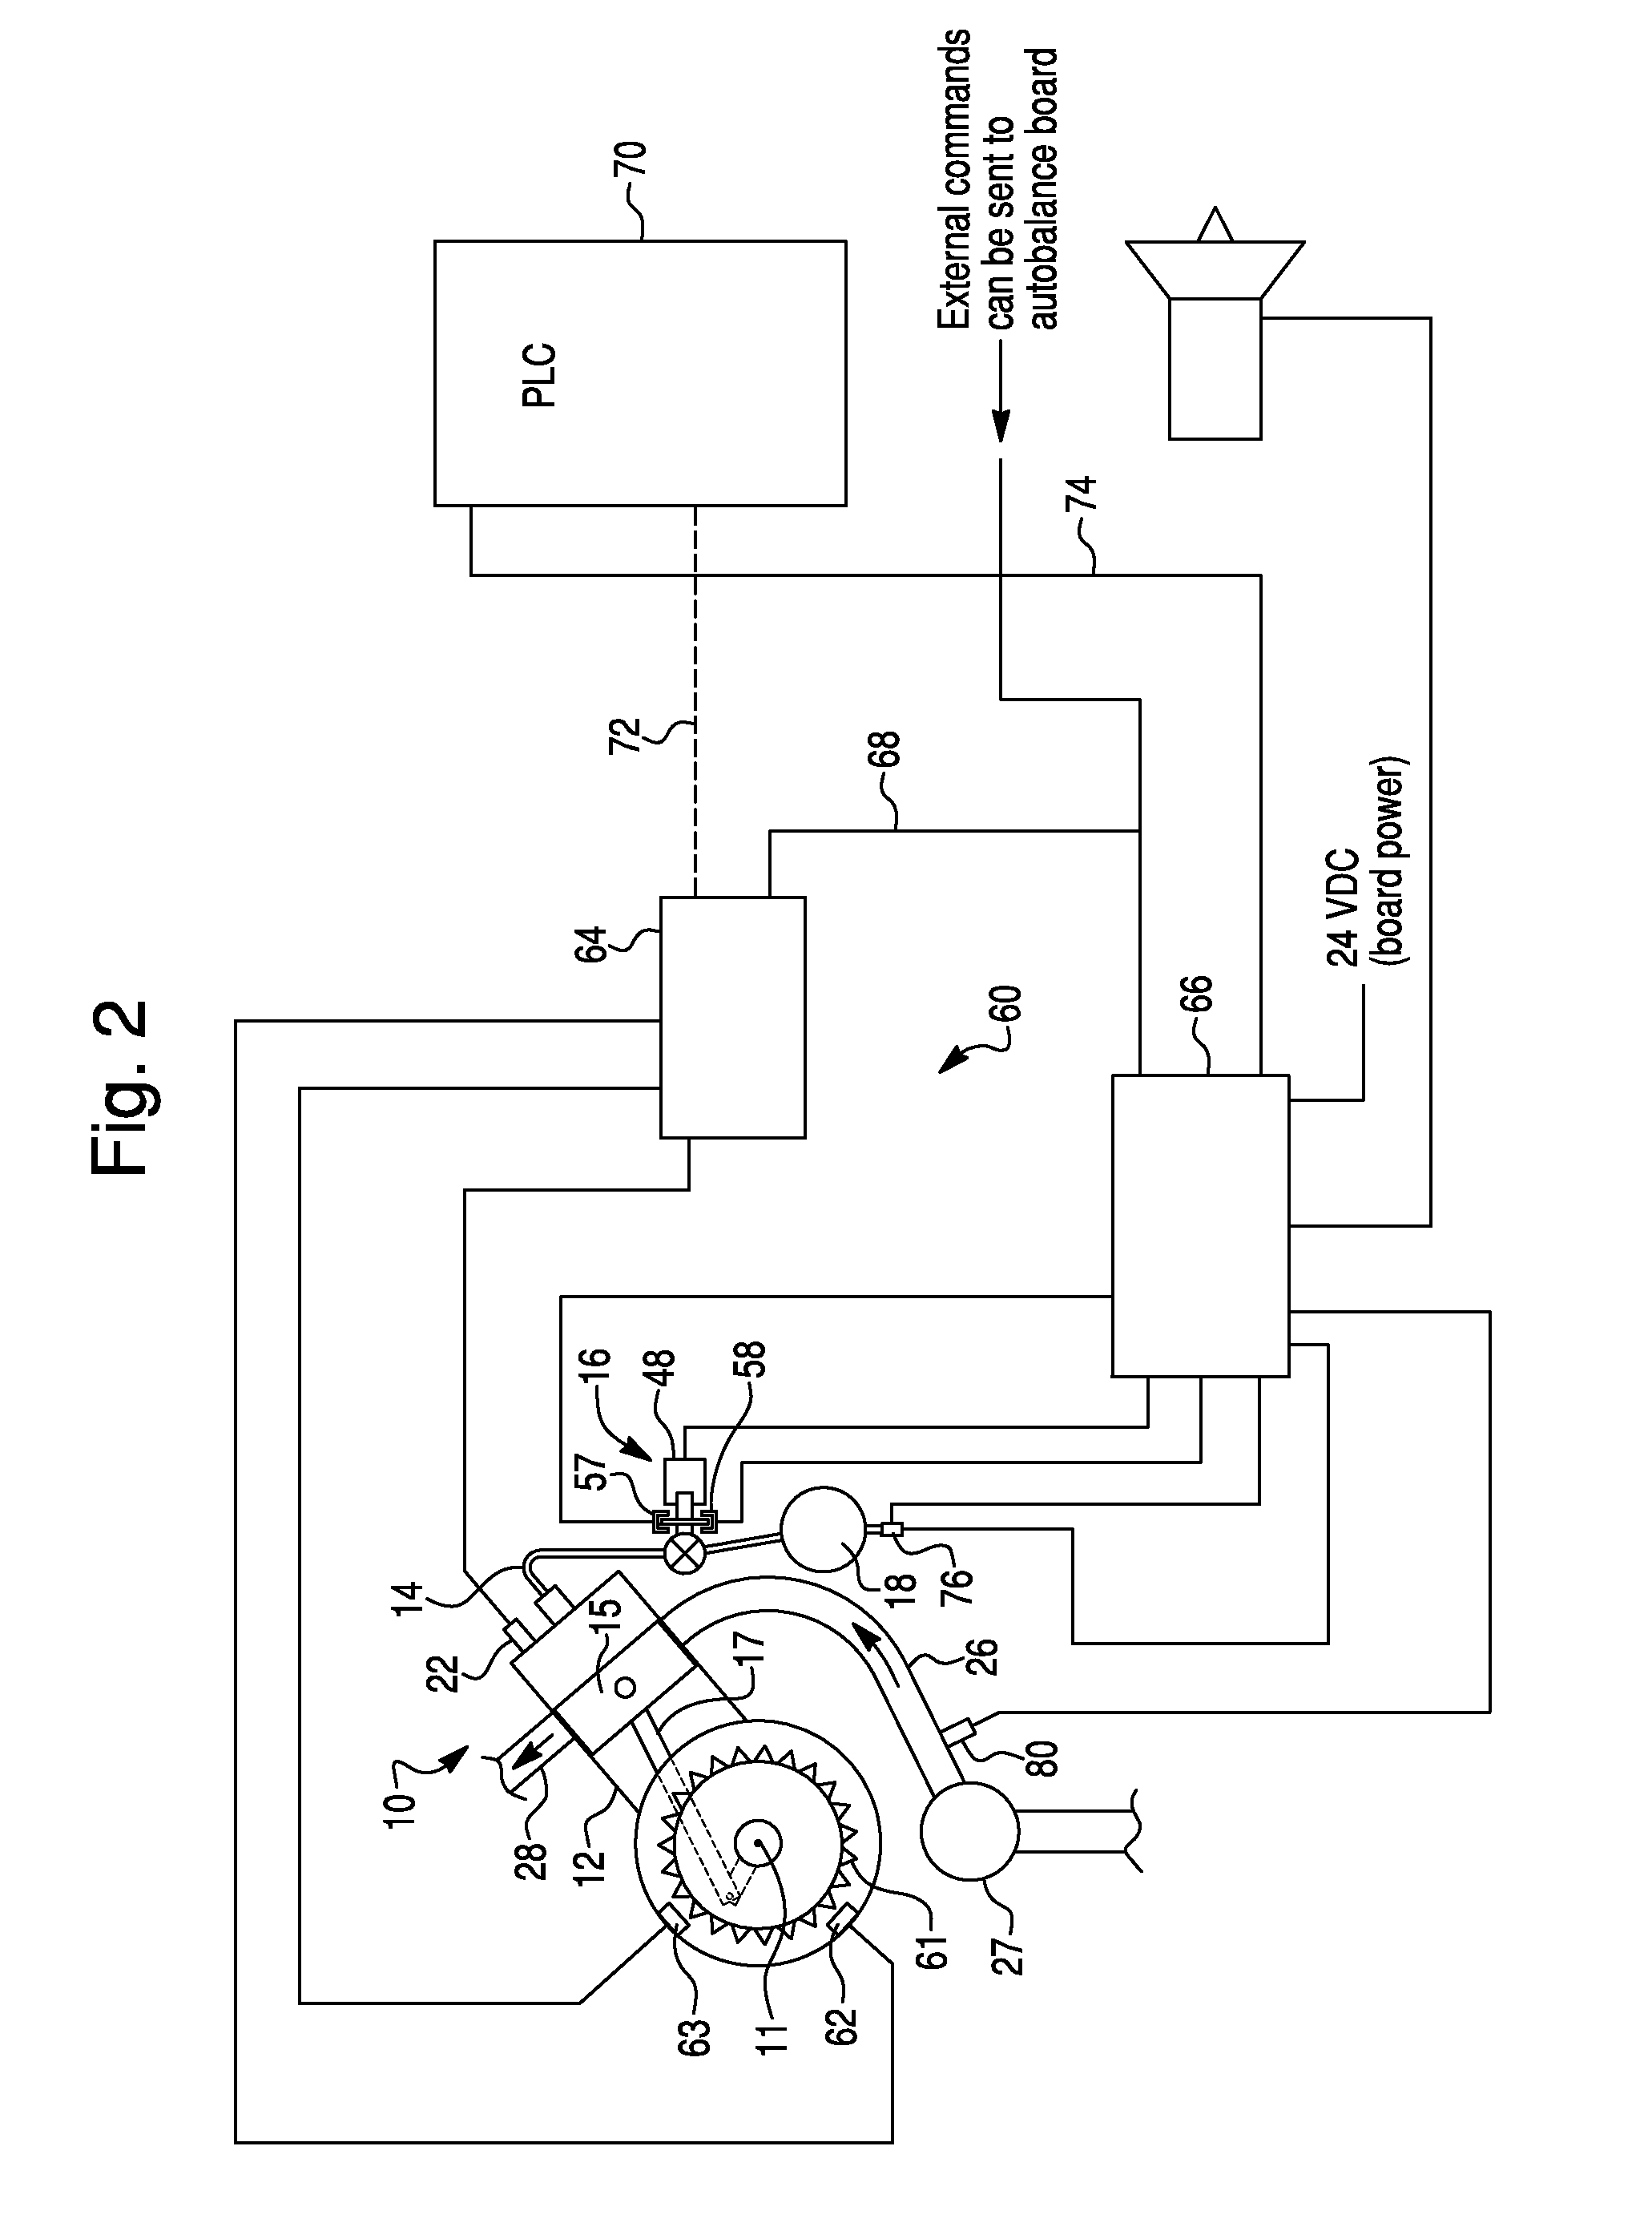 Method and apparatus for automatic pressure balancing of industrial large-bore internal combustion engines